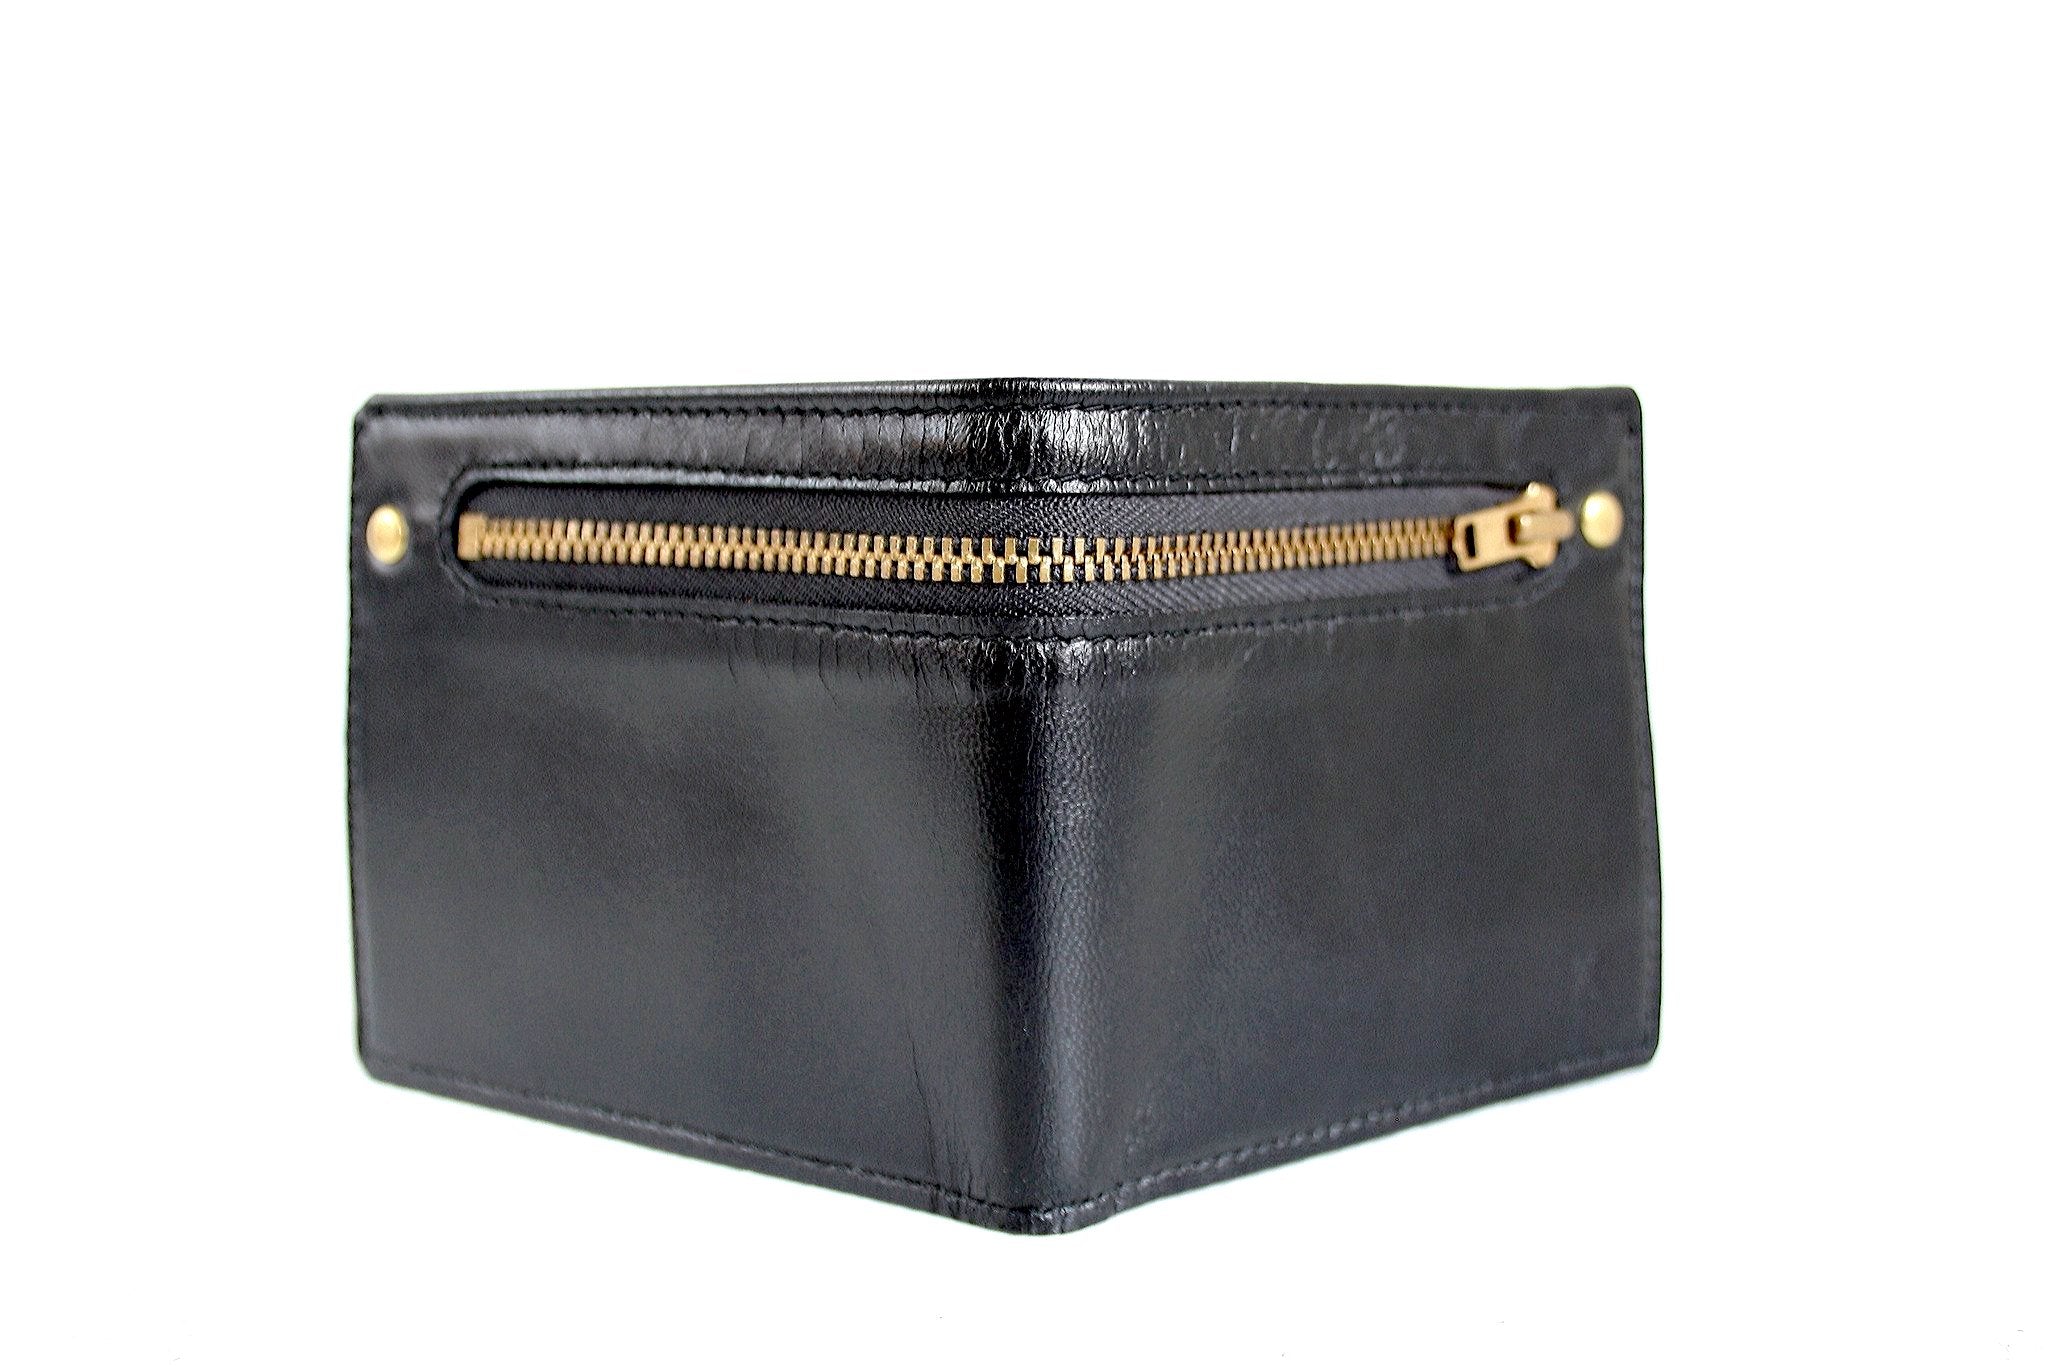 handmade leather wallet black wallet leather goods made in Canada Montreals 